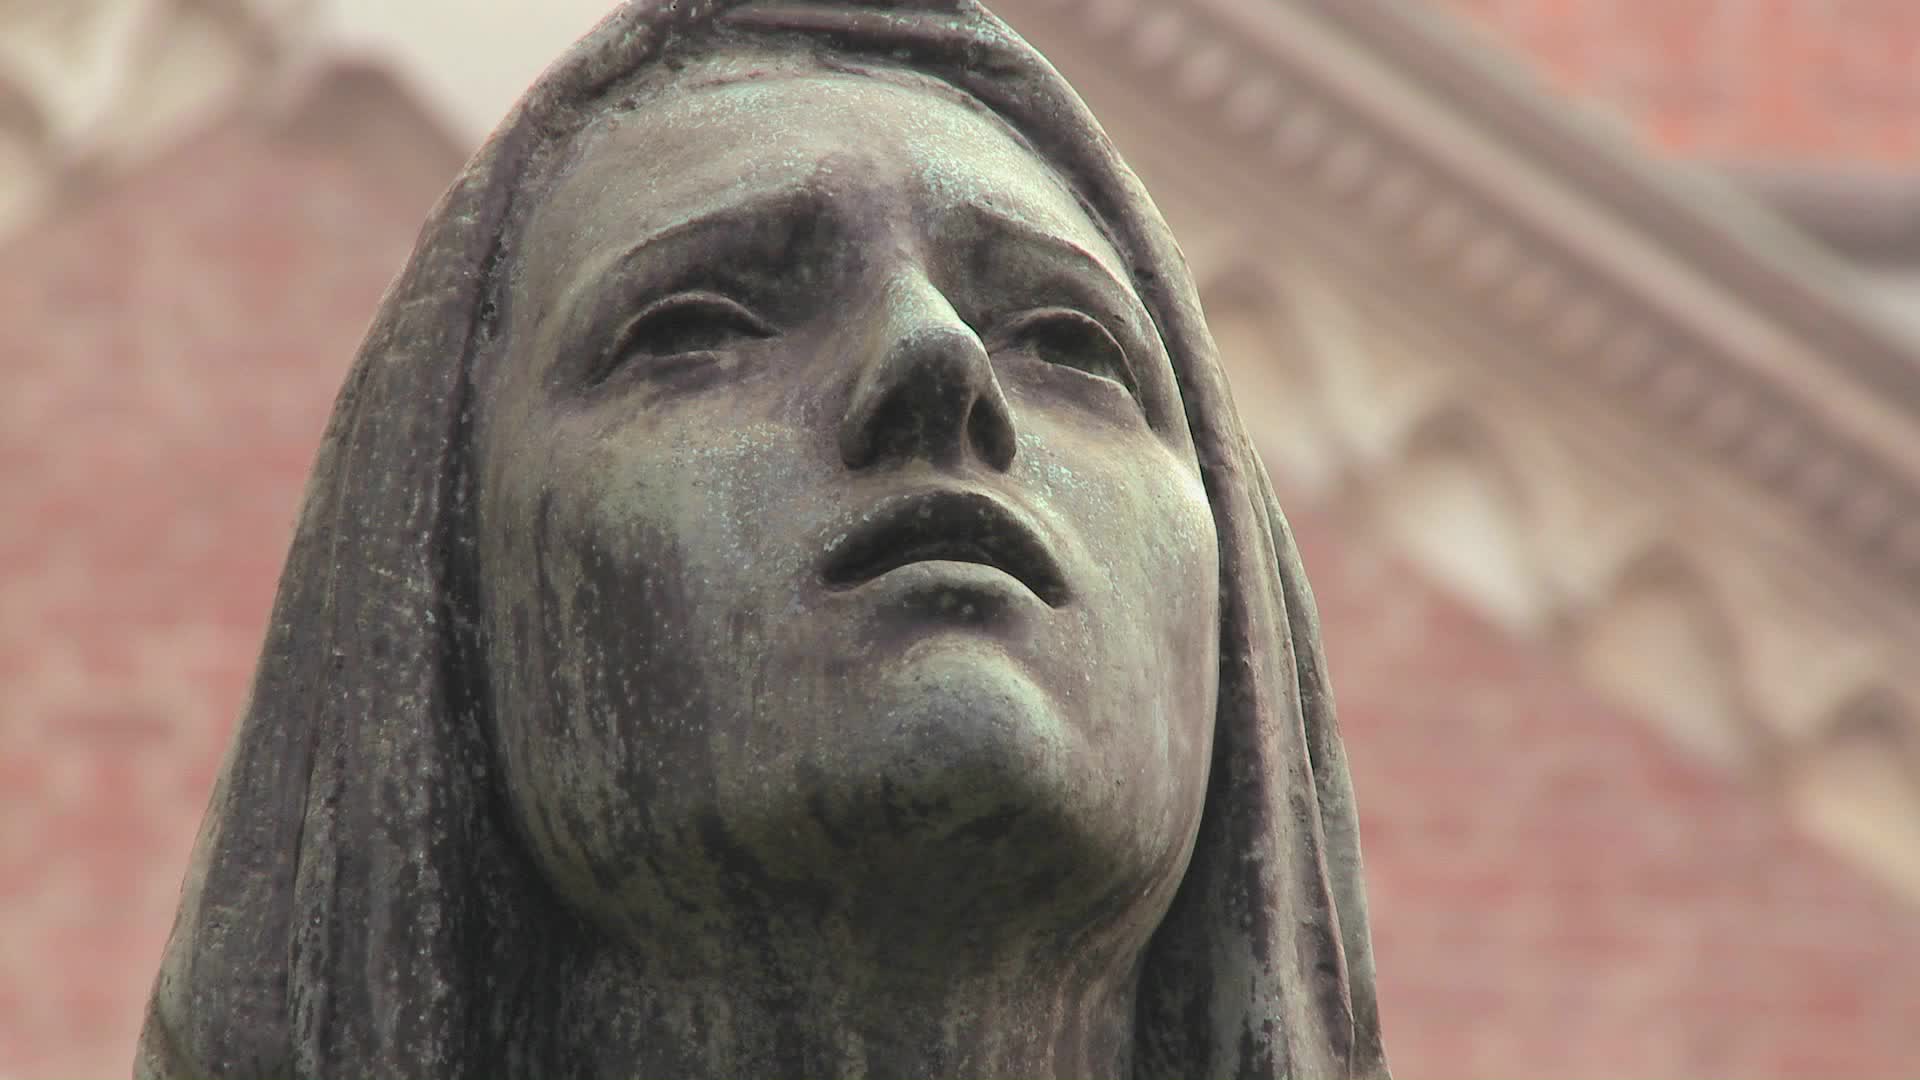 Video: A statue of a woman weeping in a cemetery or church. ~ #11496839